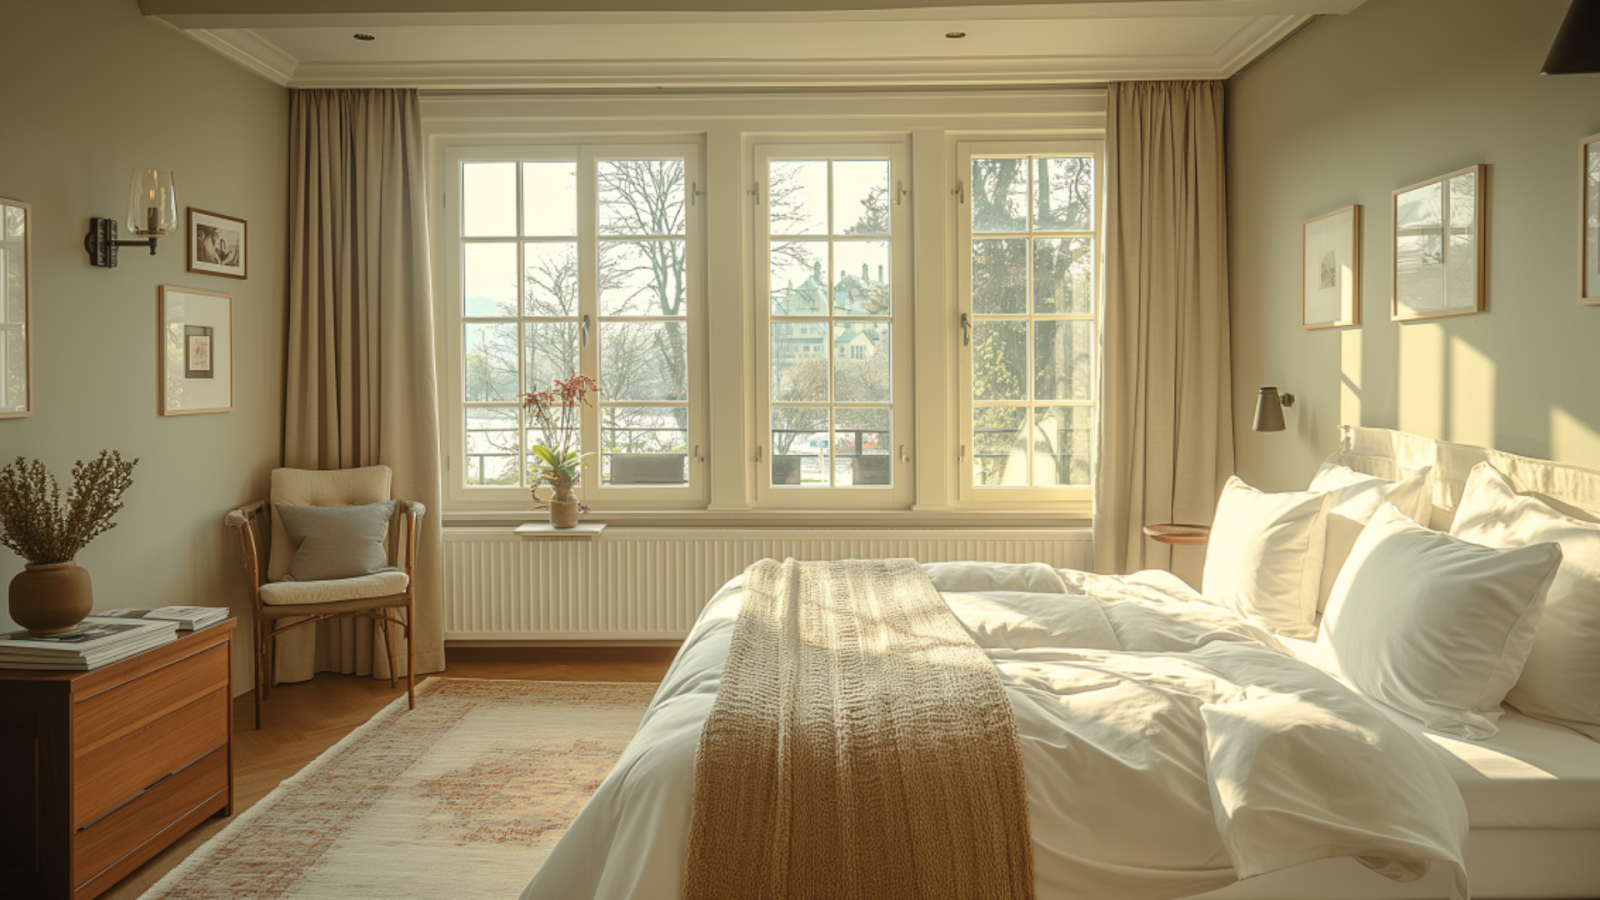 Interior of a cozy boutique hotel room in Zurich featuring a blend of modern amenities and traditional Swiss decor.